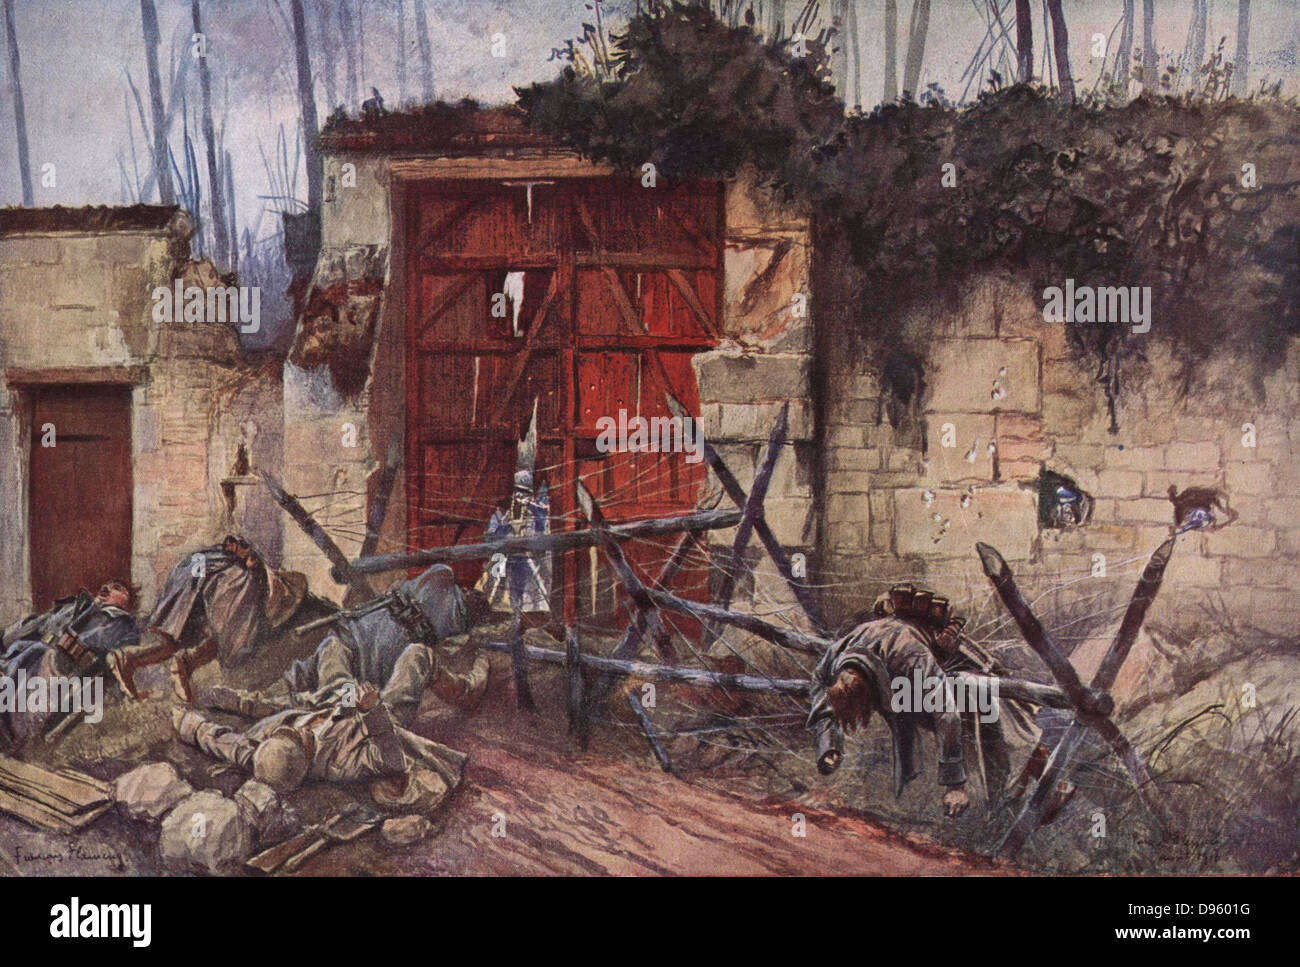 First World War battlefield scene, 1918.   A gate into the park of the chateau of Plessis-de-Roye.  Defenders have made gun ports in the wall and the gate and have mown down the attacking infantry with lethal gunfire.    After the painting by Francois Fla Stock Photo